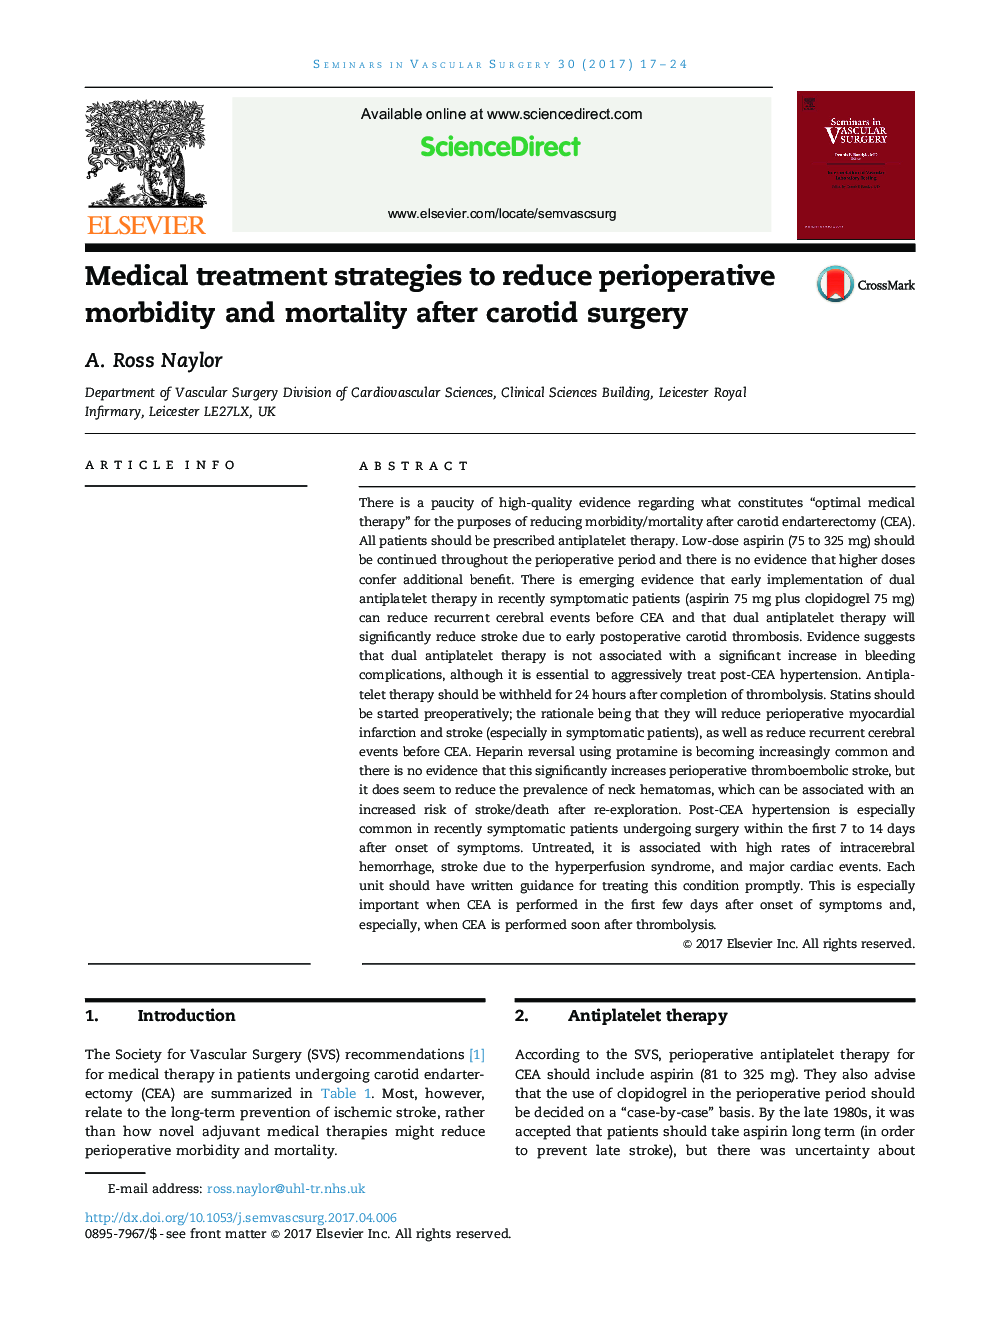 Medical treatment strategies to reduce perioperative morbidity and mortality after carotid surgery